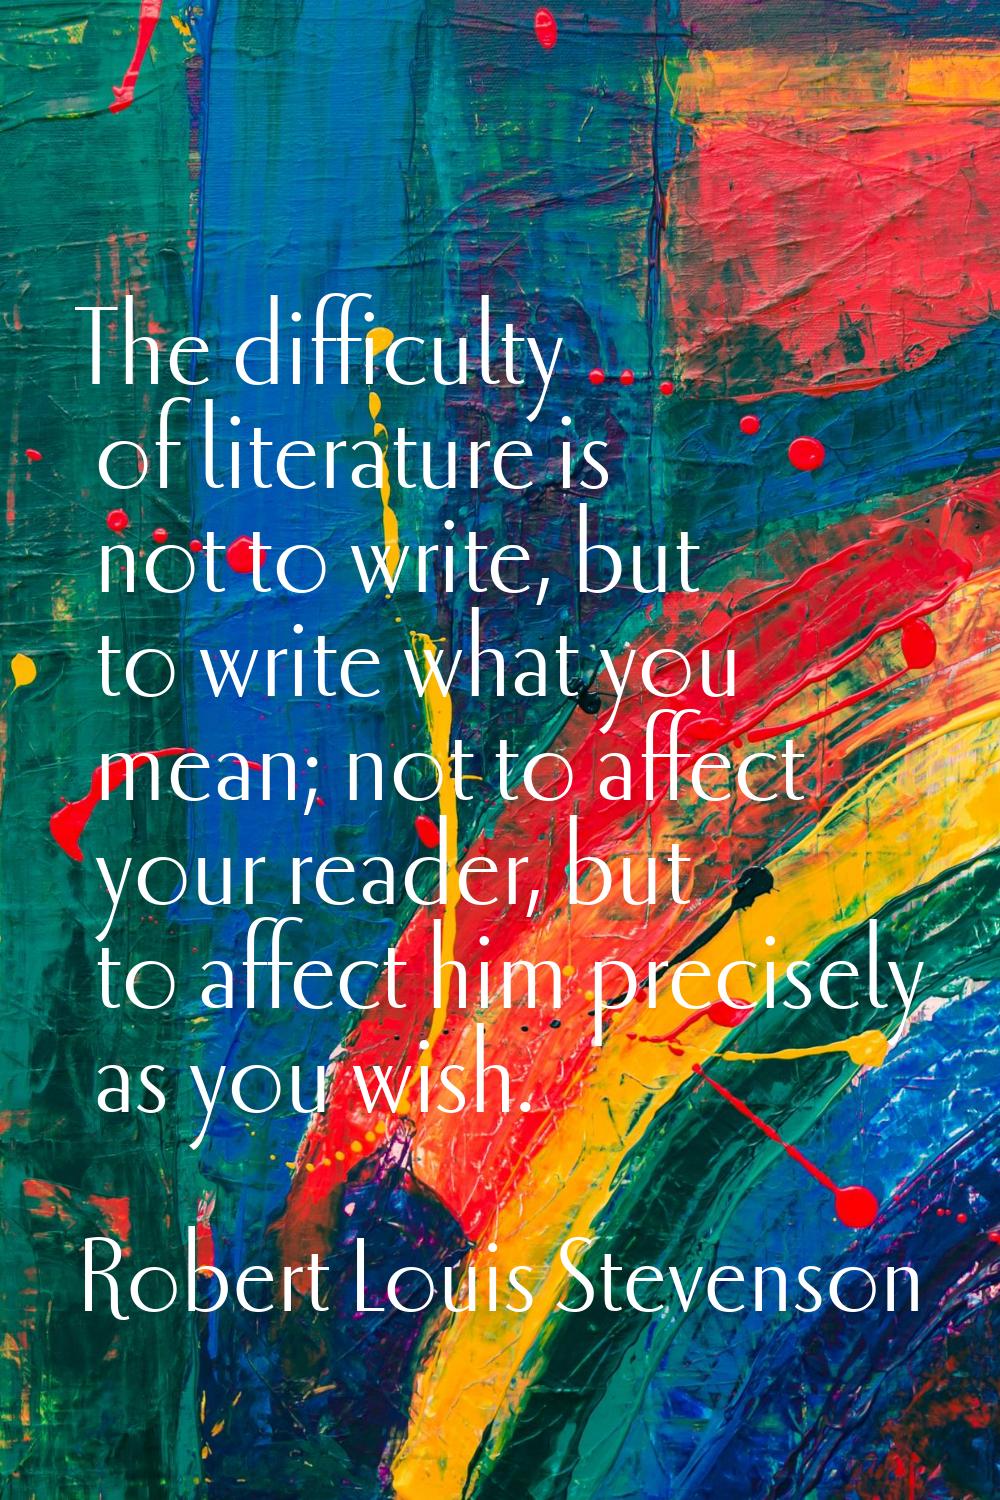 The difficulty of literature is not to write, but to write what you mean; not to affect your reader